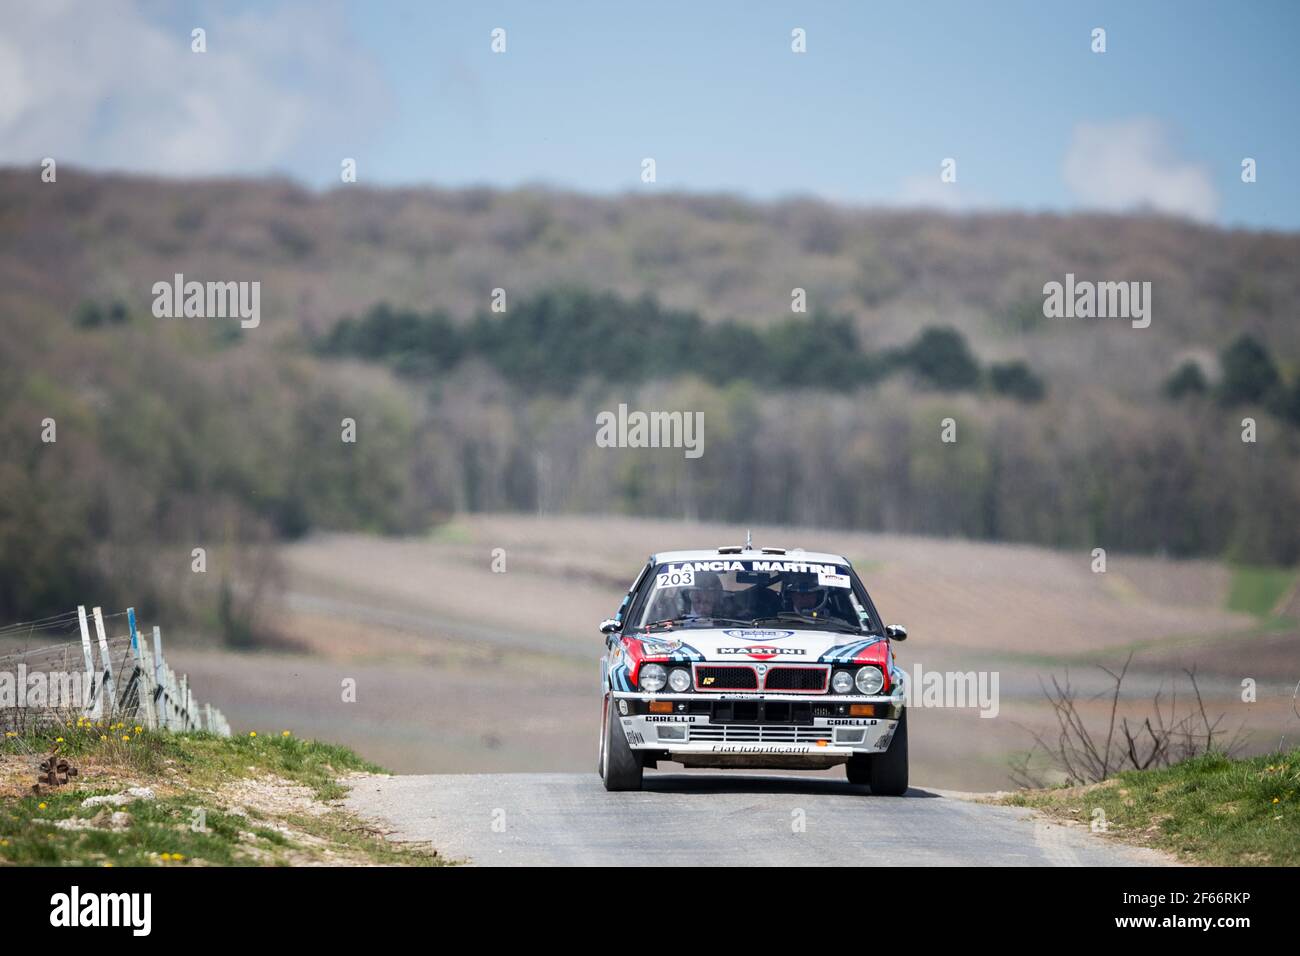 203 BALLAND Jean-Louis DESTREZ Valentine Lancia Delta HF Intégrale 16V Action during the 2017 French rally championship, Rallye Epernay-Vins de Champagne, March 31 to April 2 at Epernay, France - Photo Clement Luck / DPPI Stock Photo